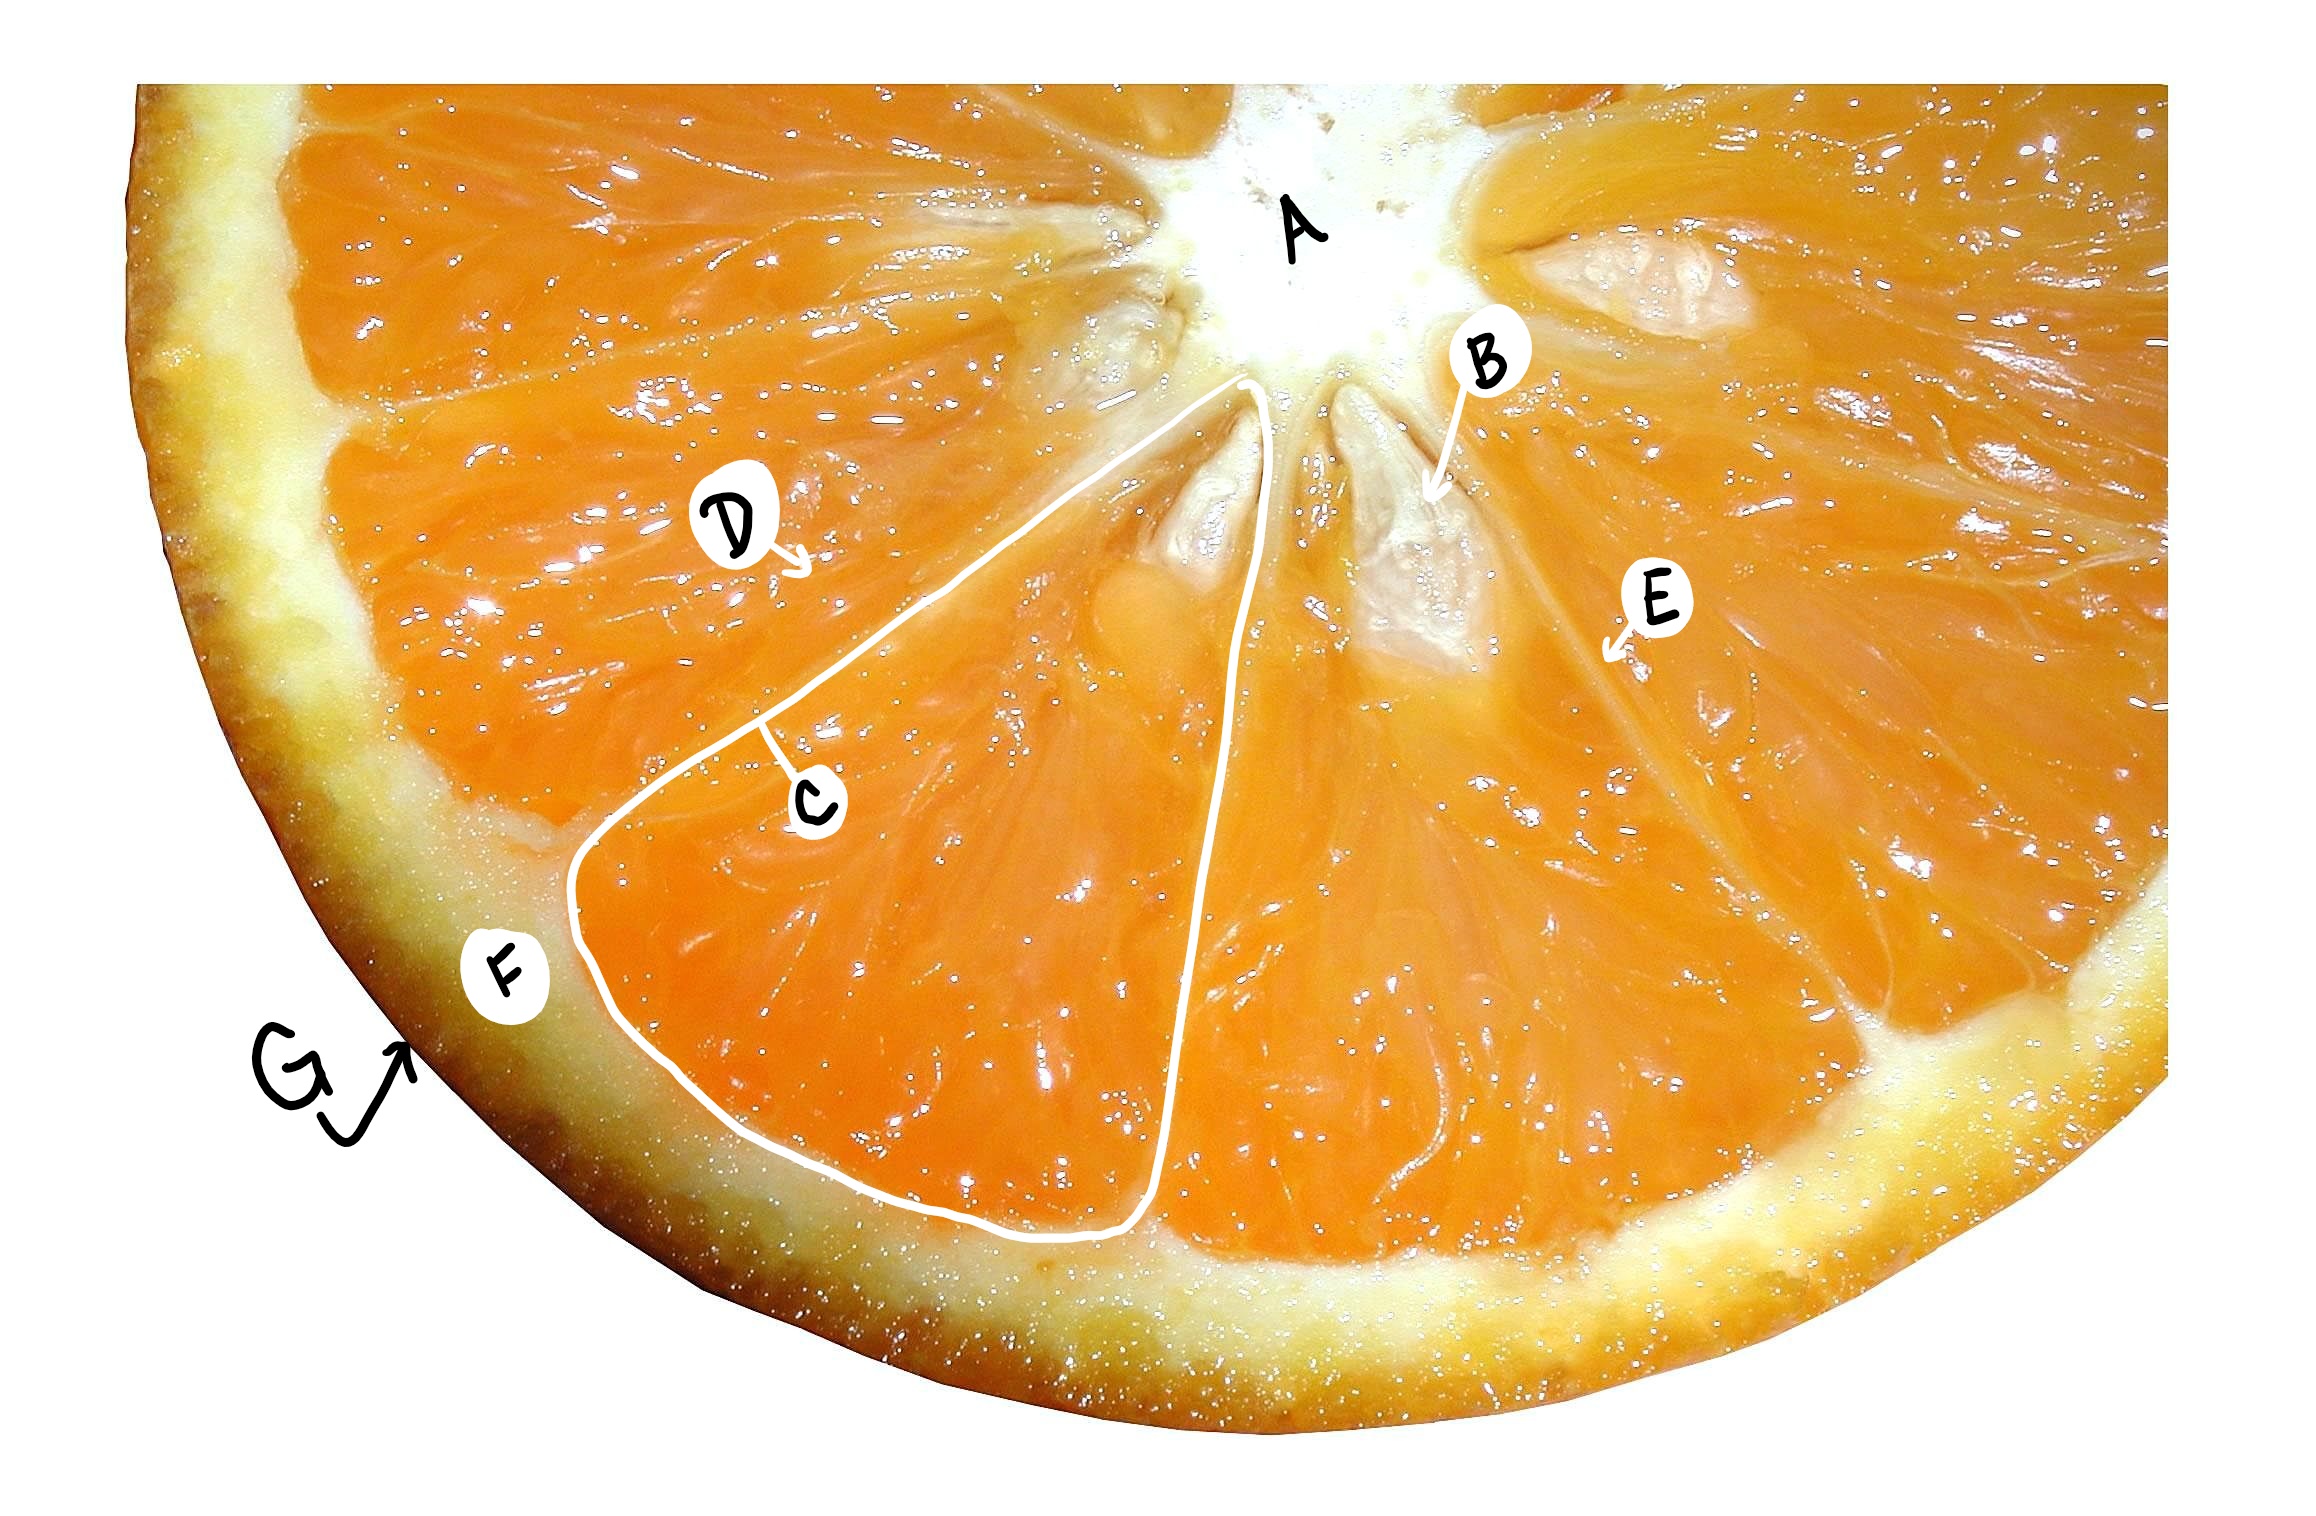 A cross section of an orange